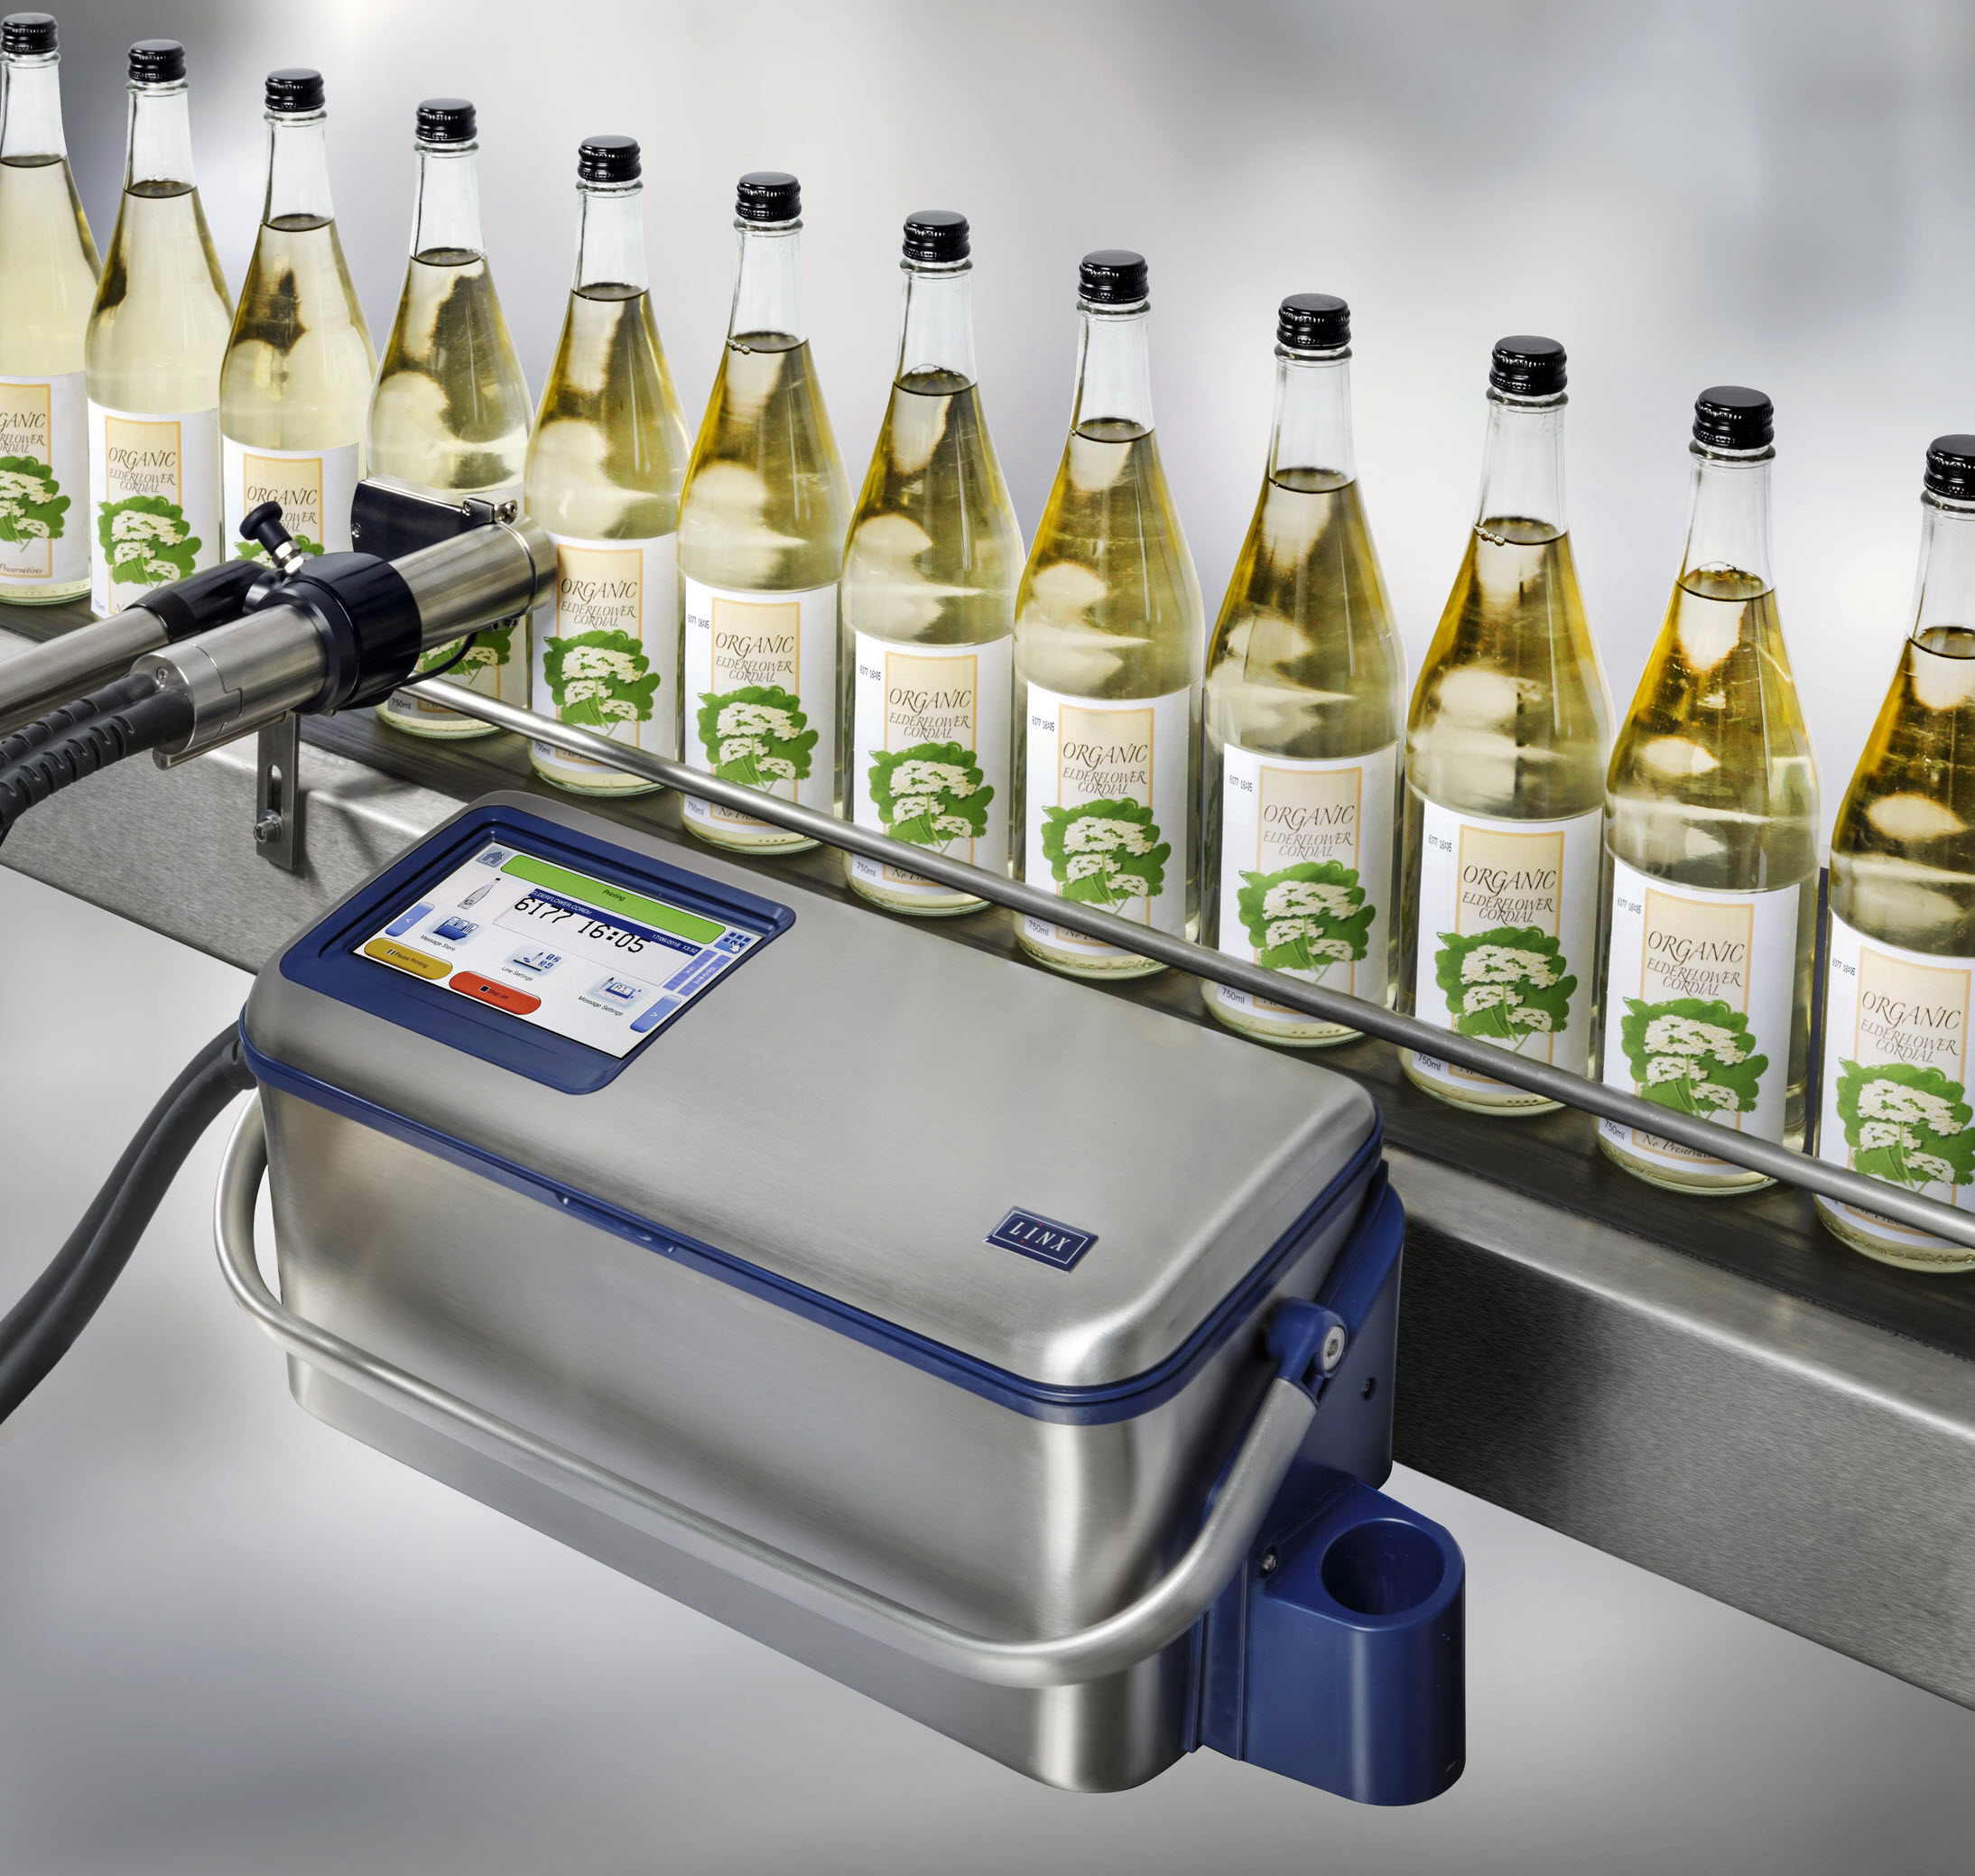 Holde Kriger Outlaw Linx launches first portable Continuous Ink Jet for SMEs